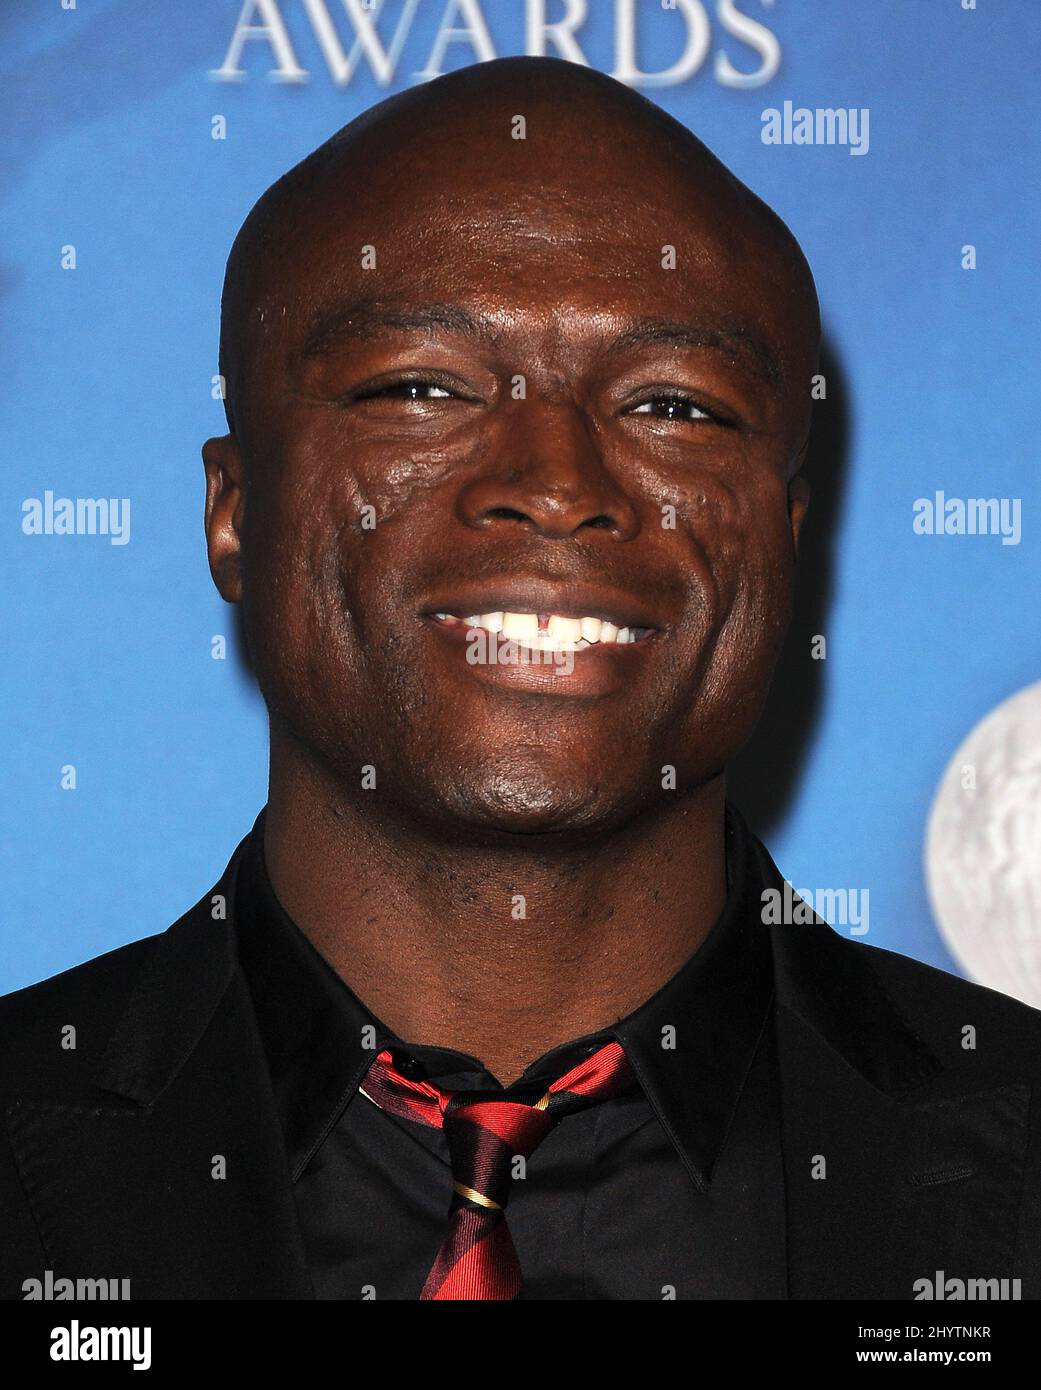 Seal attending The 40th NAACP Image Awards Held at the Shrine Auditorium. Stock Photo